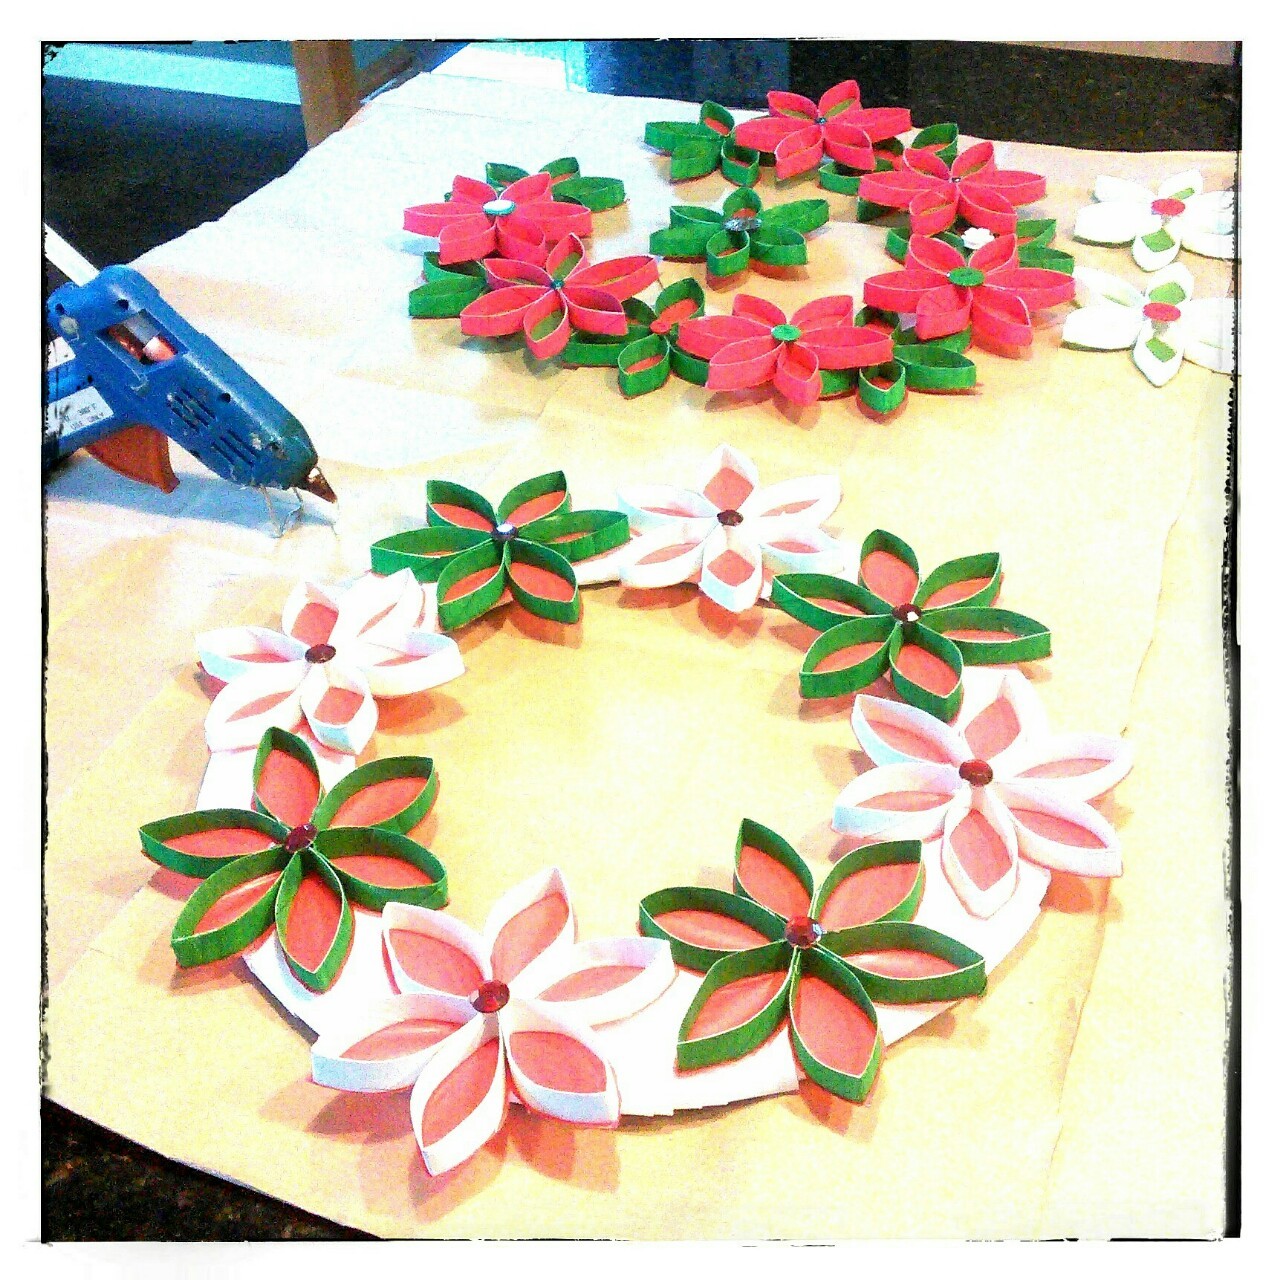 Poinsettia Wreath Made From Toilet Paper Rolls